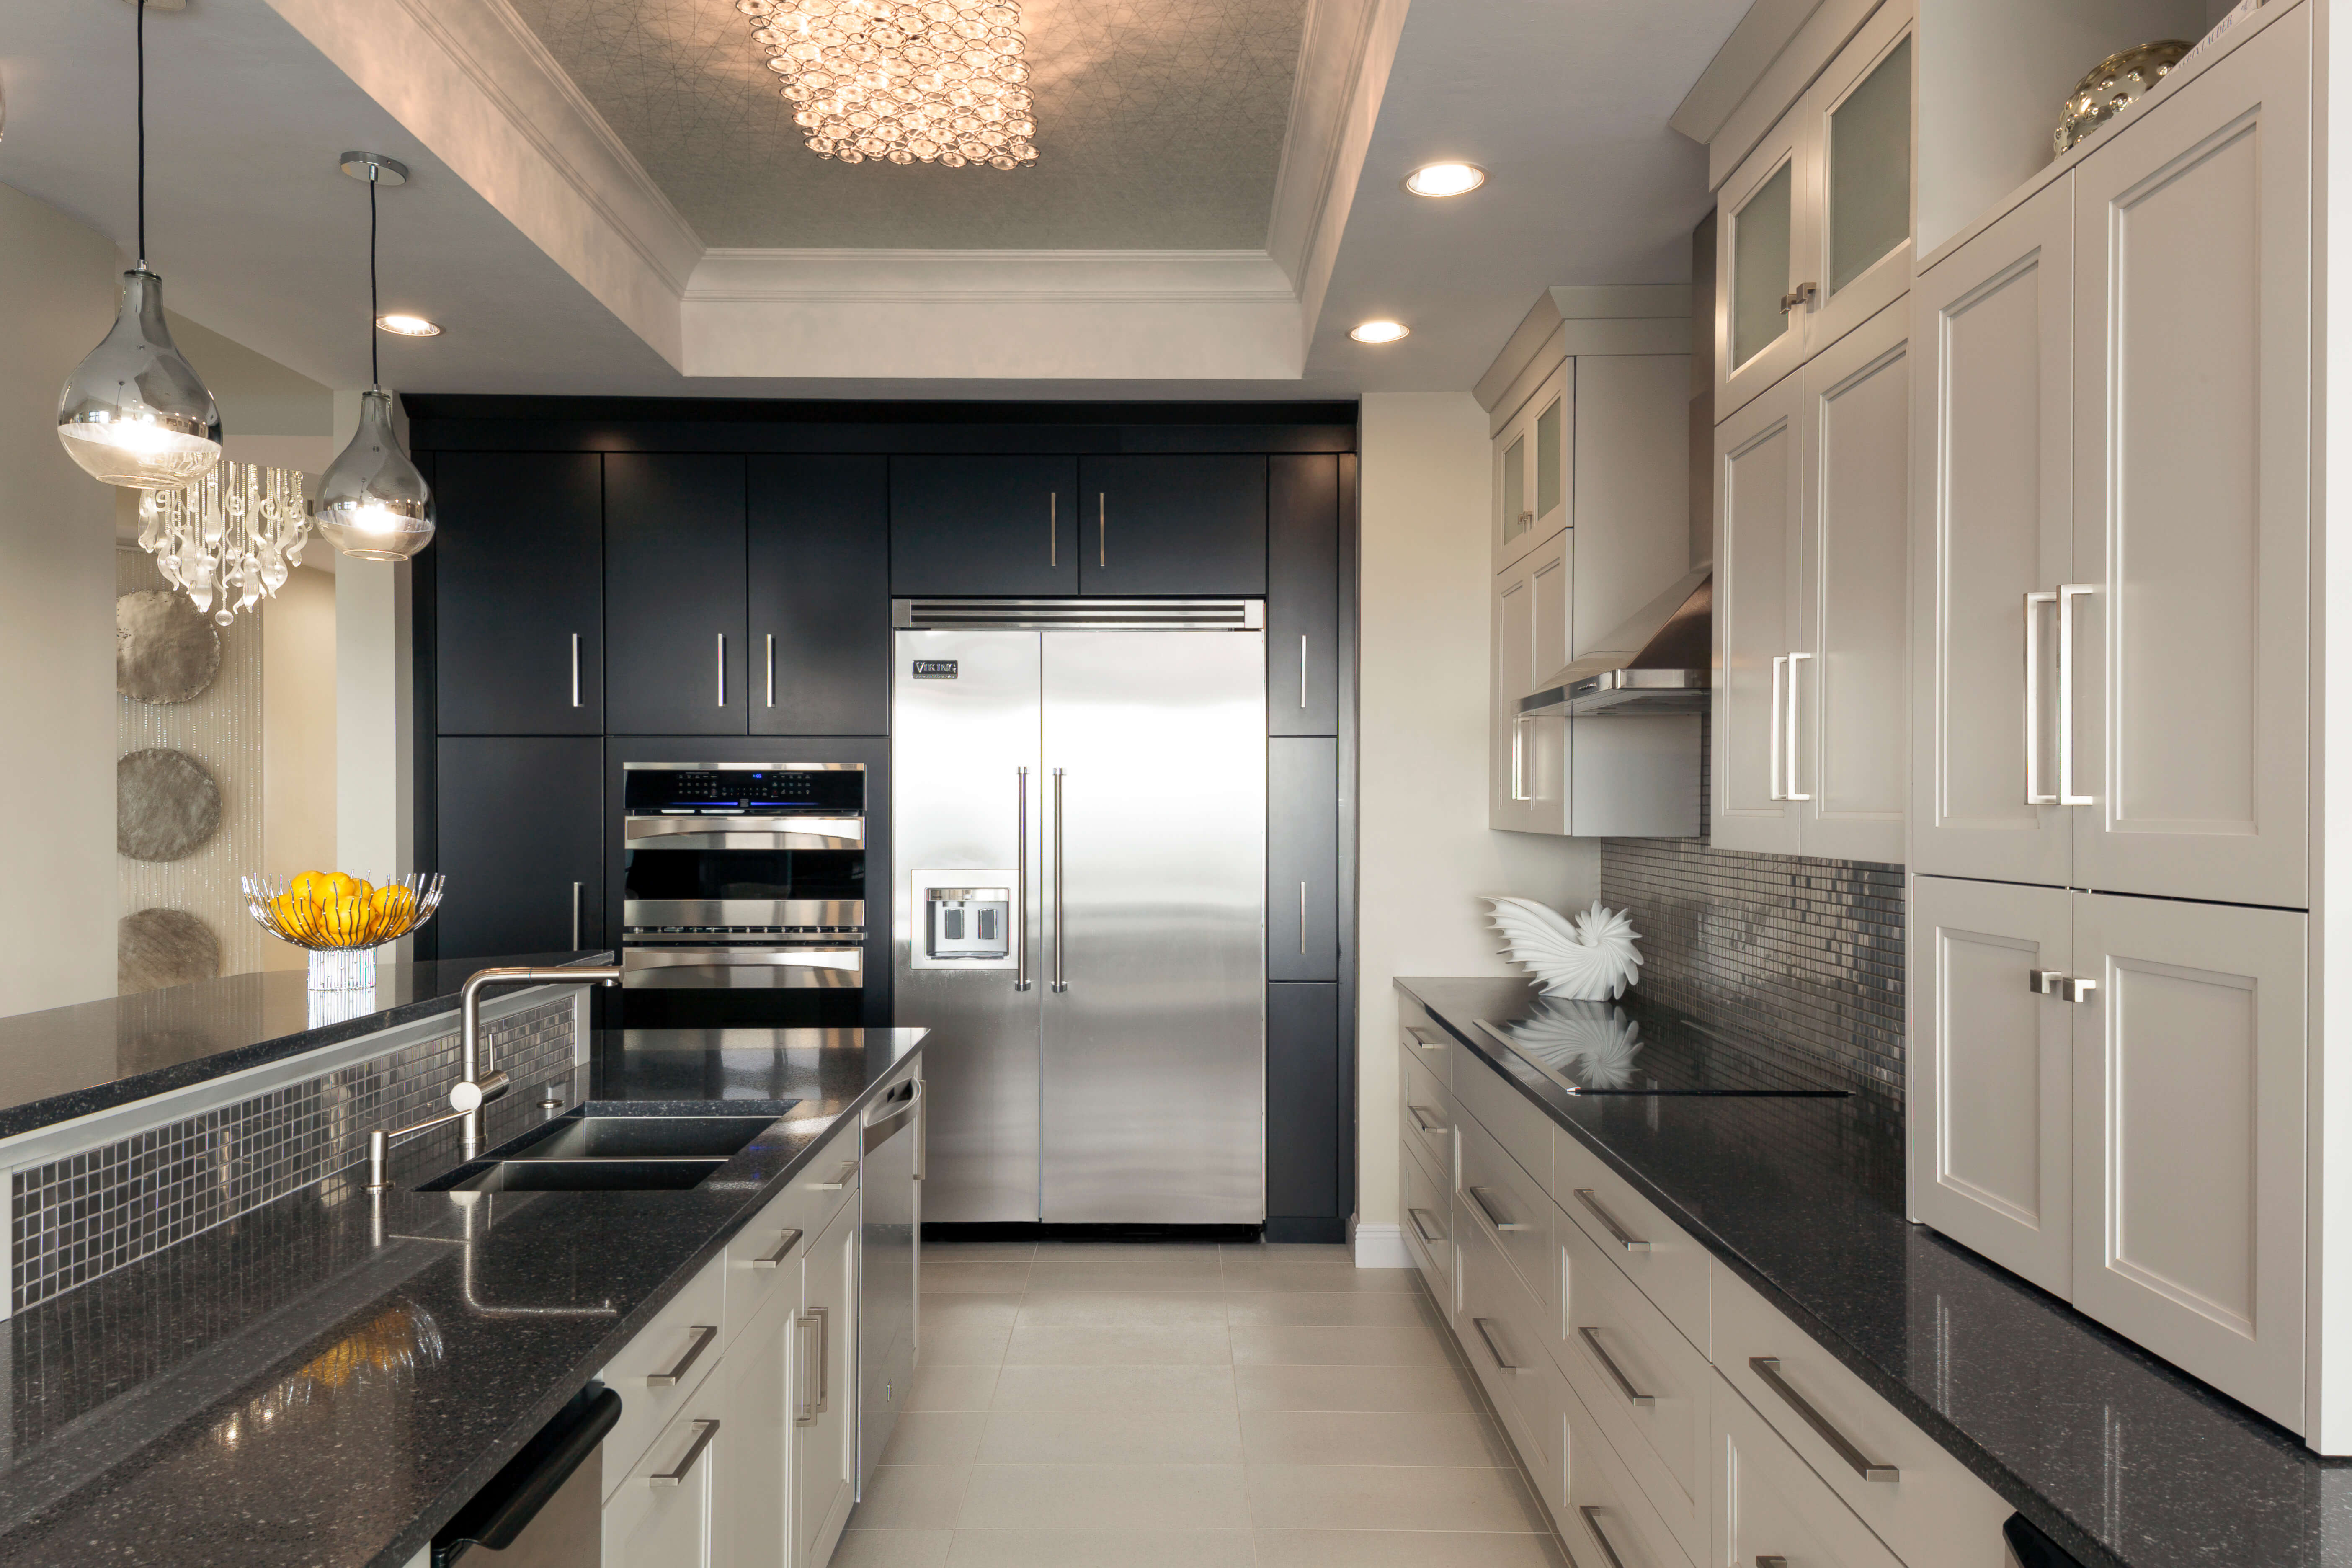 A black and white kitchen with a sleek transitional style.